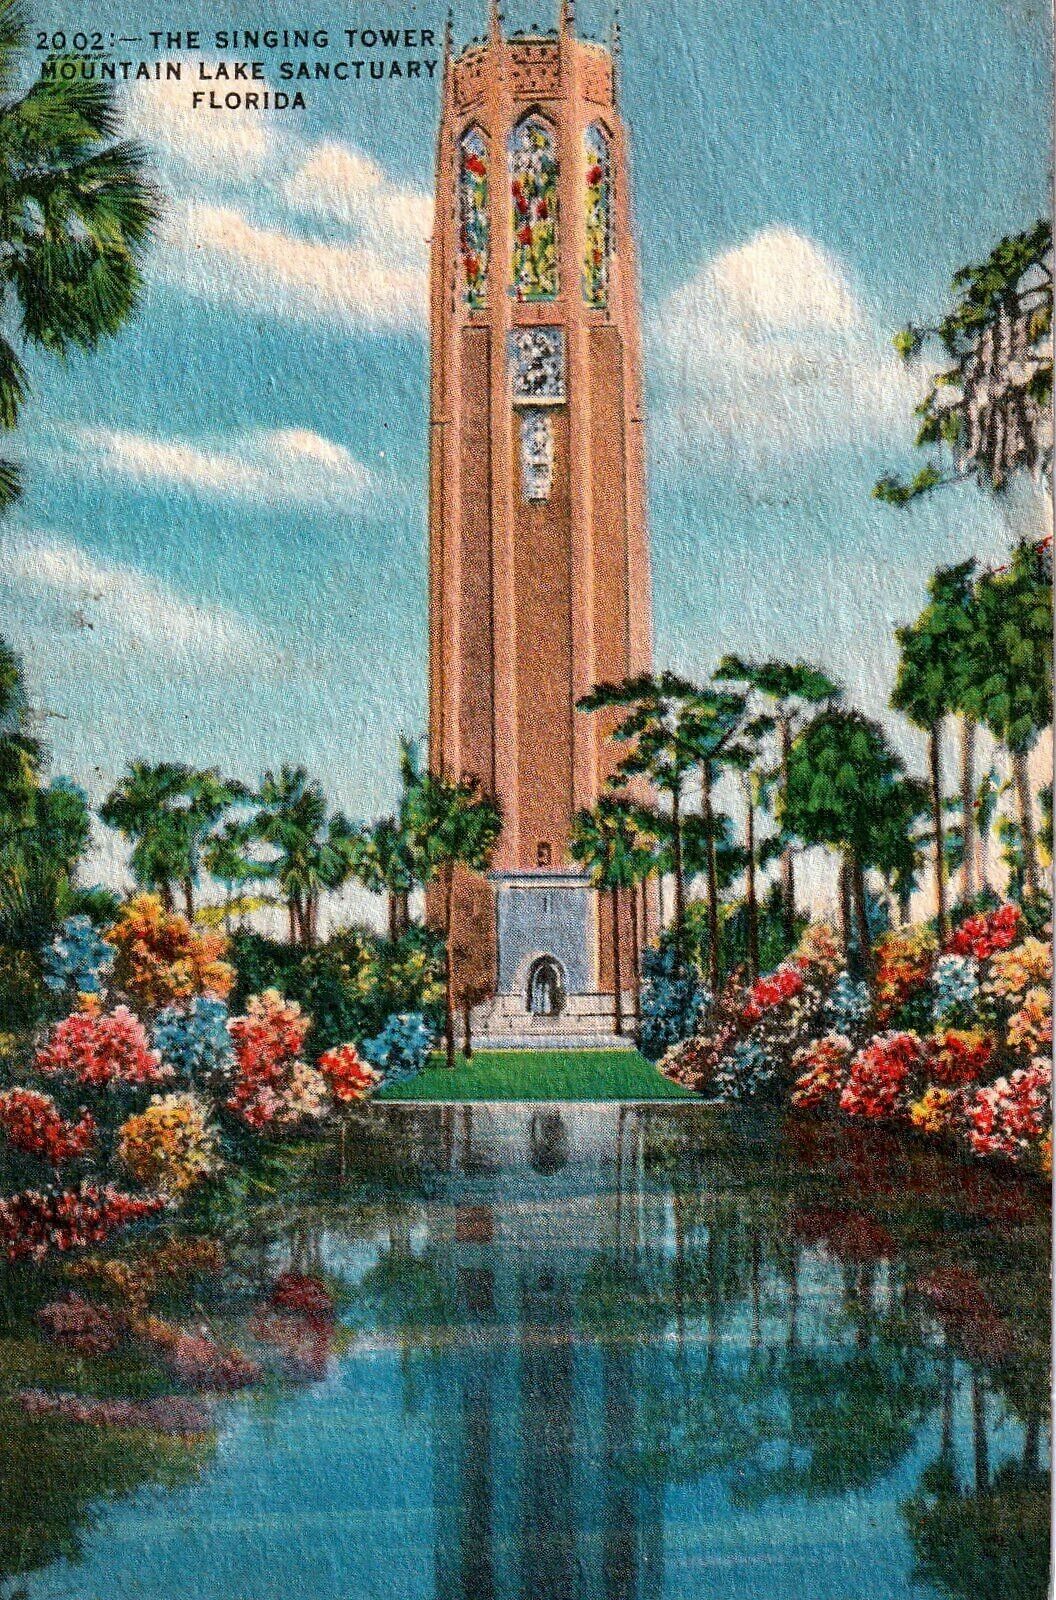 The Singing Tower at Mountain Lake Sanctuary Florida Linen Postcard Unposted